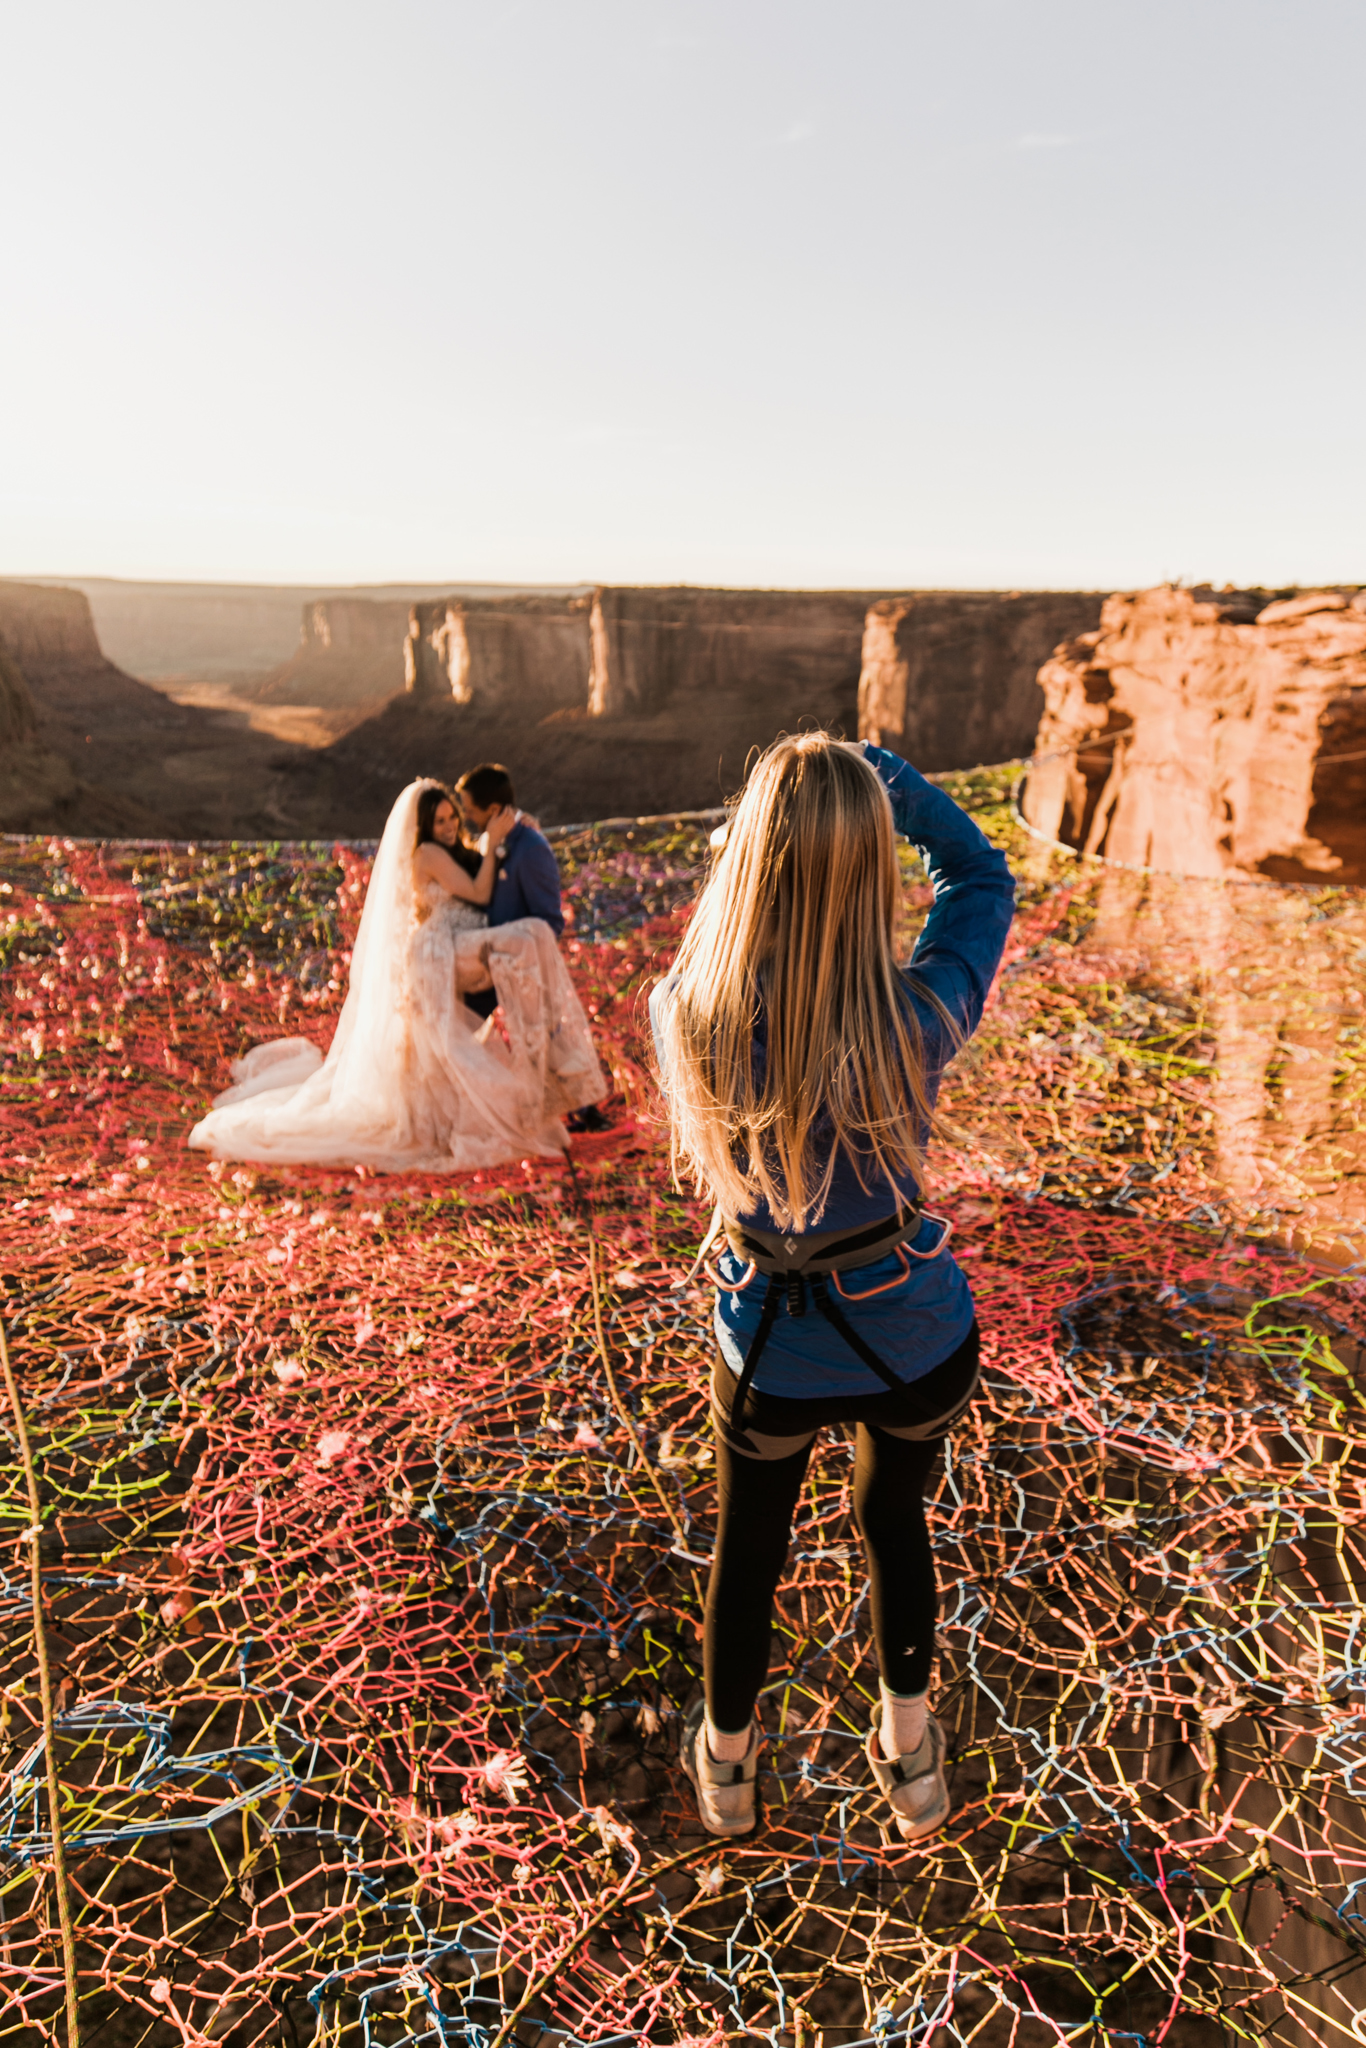 photographing a wedding on a spacenet in moab, utah | utah and california adventure elopement photographers | the hearnes adventure photography | www.thehearnes.com